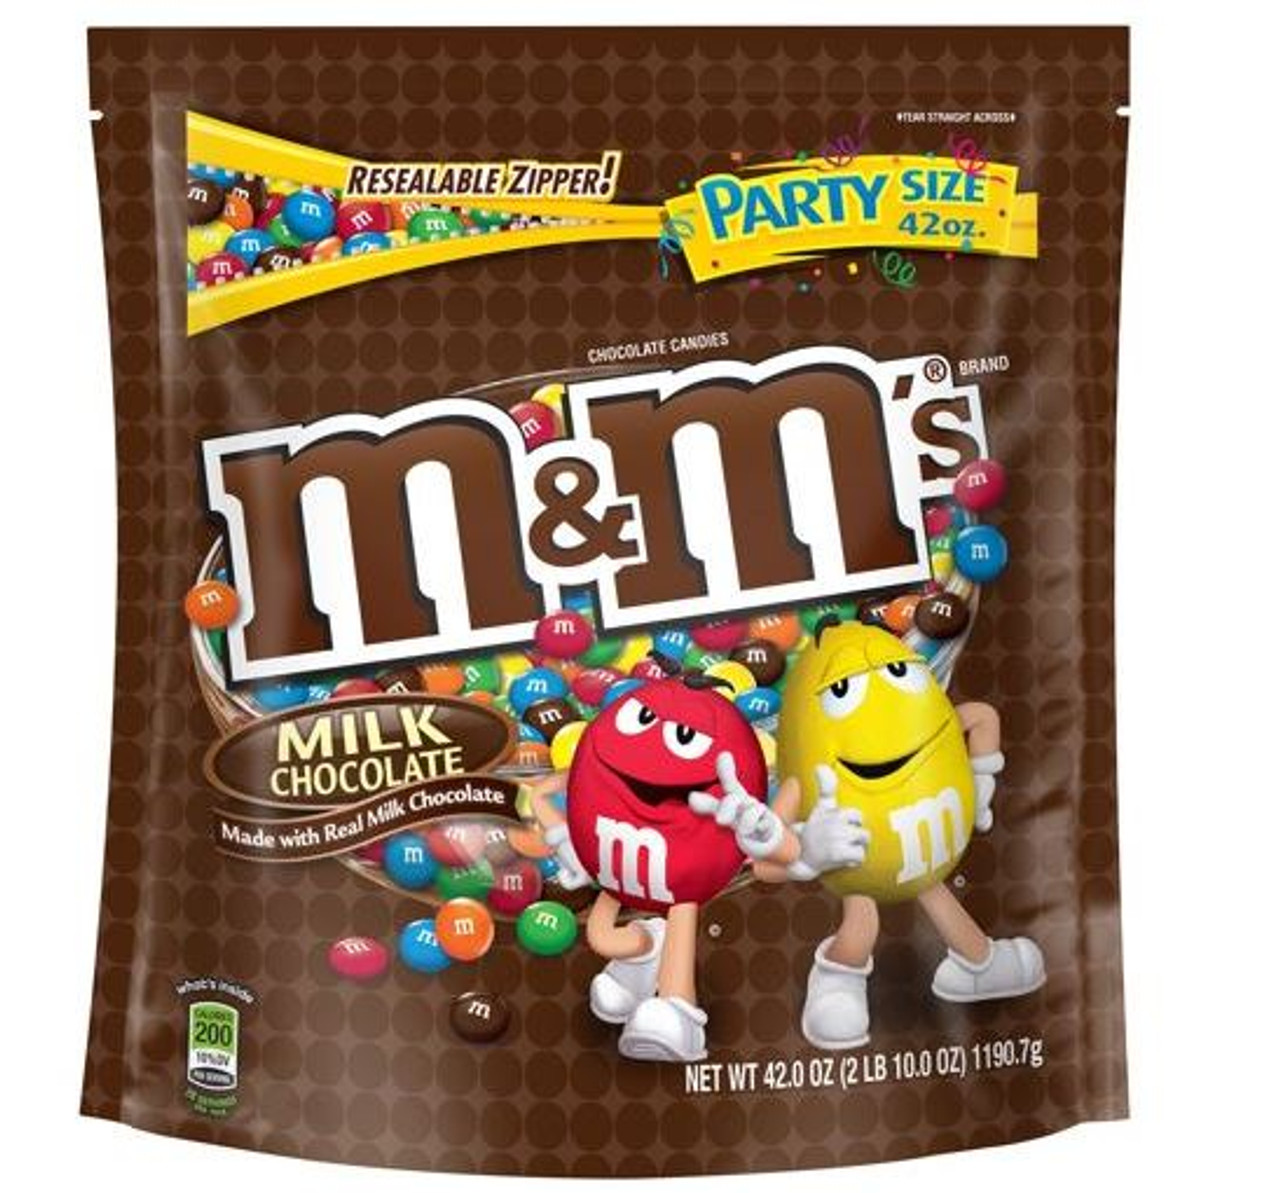 Huge Size! M&M'S Candies, Peanut Chocolate, 62 Ounce Jar! REVIEW 